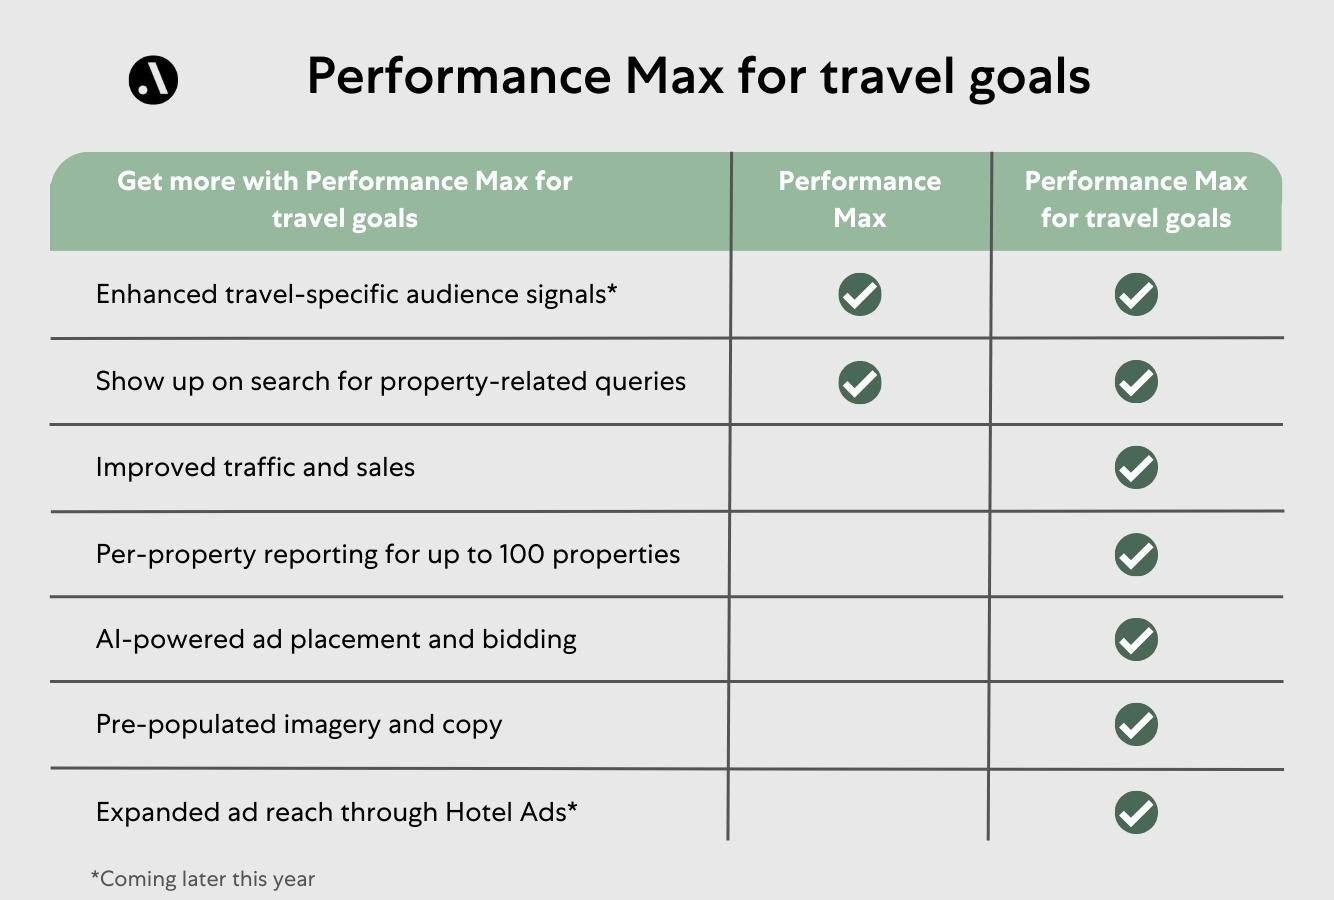 Performance Max for travel goals vs. standaard Performance Max campagnes